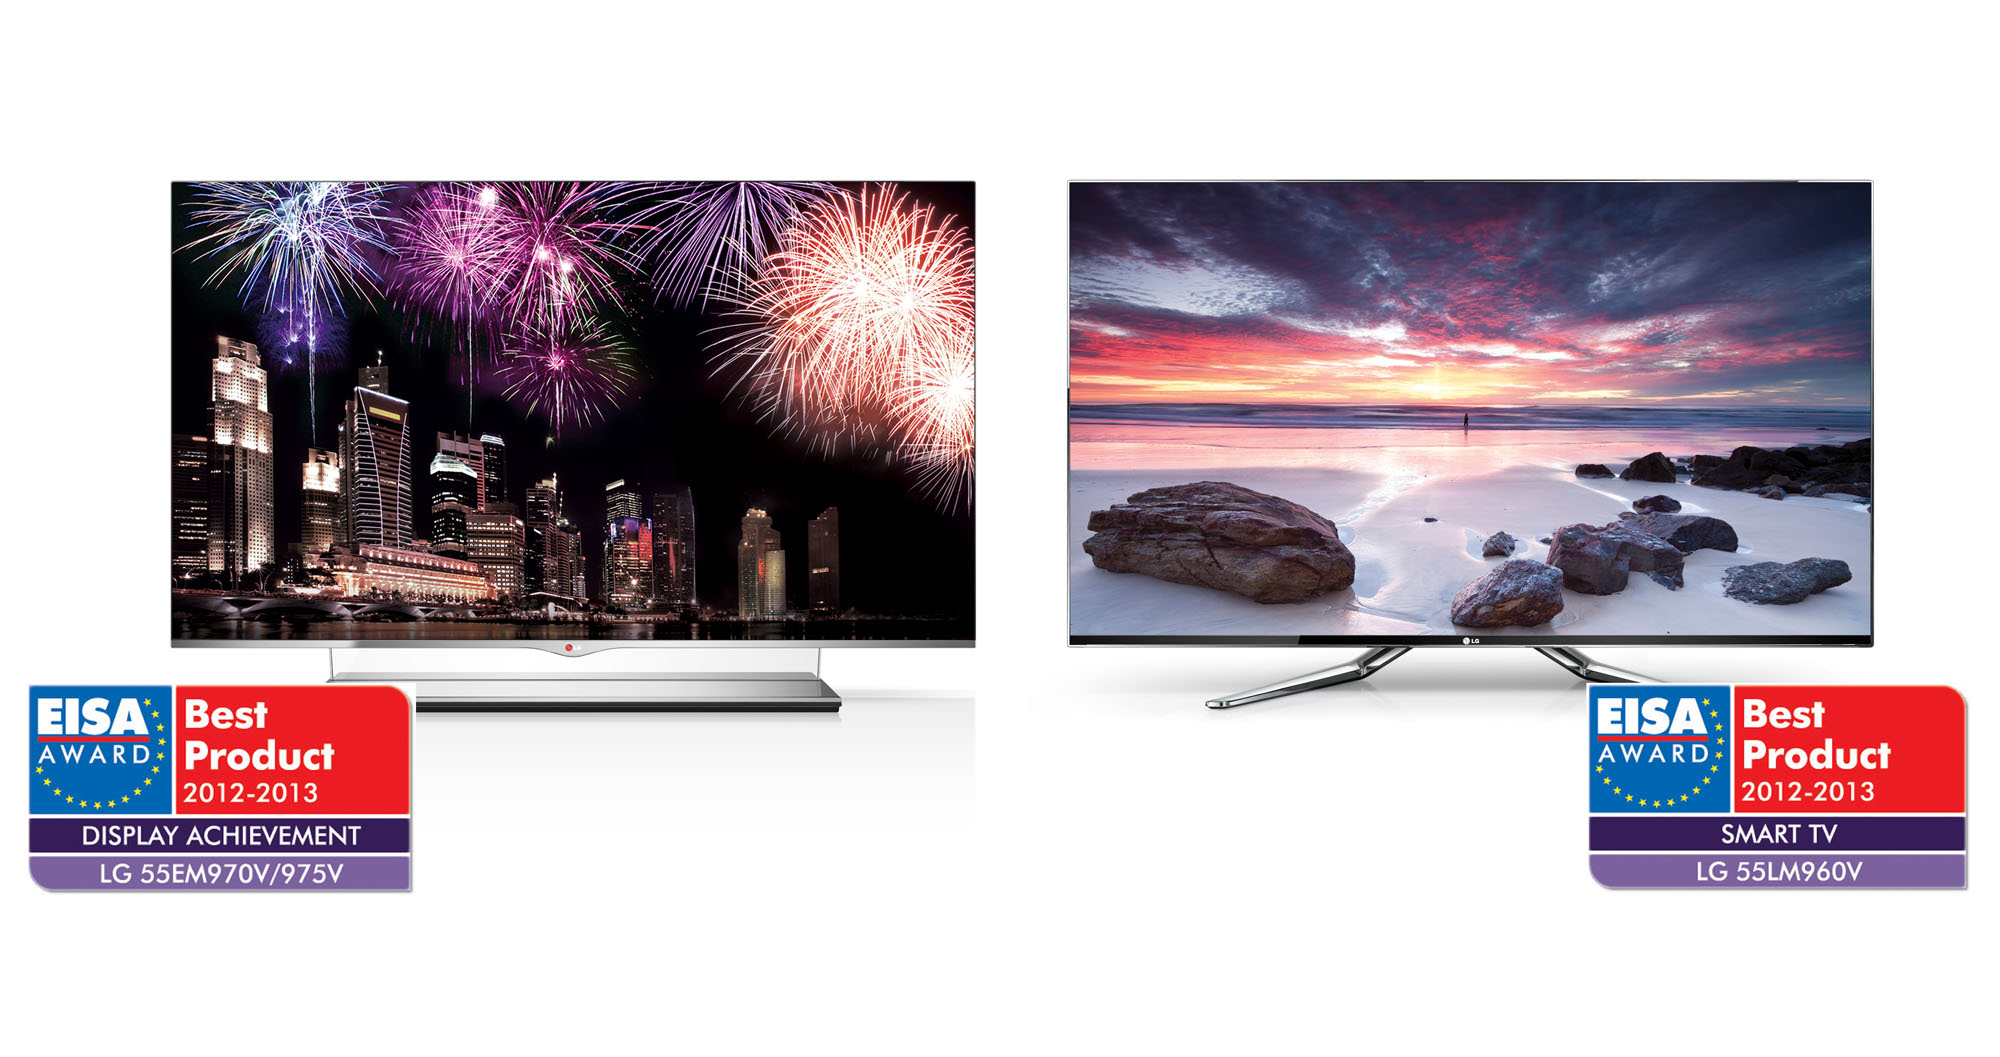 LG 55EM970V with EISA Award Best Product logo for Display Achievement on the left, and LG 55LM960V with EISA Award Best Product logos for Smart TV category on the right